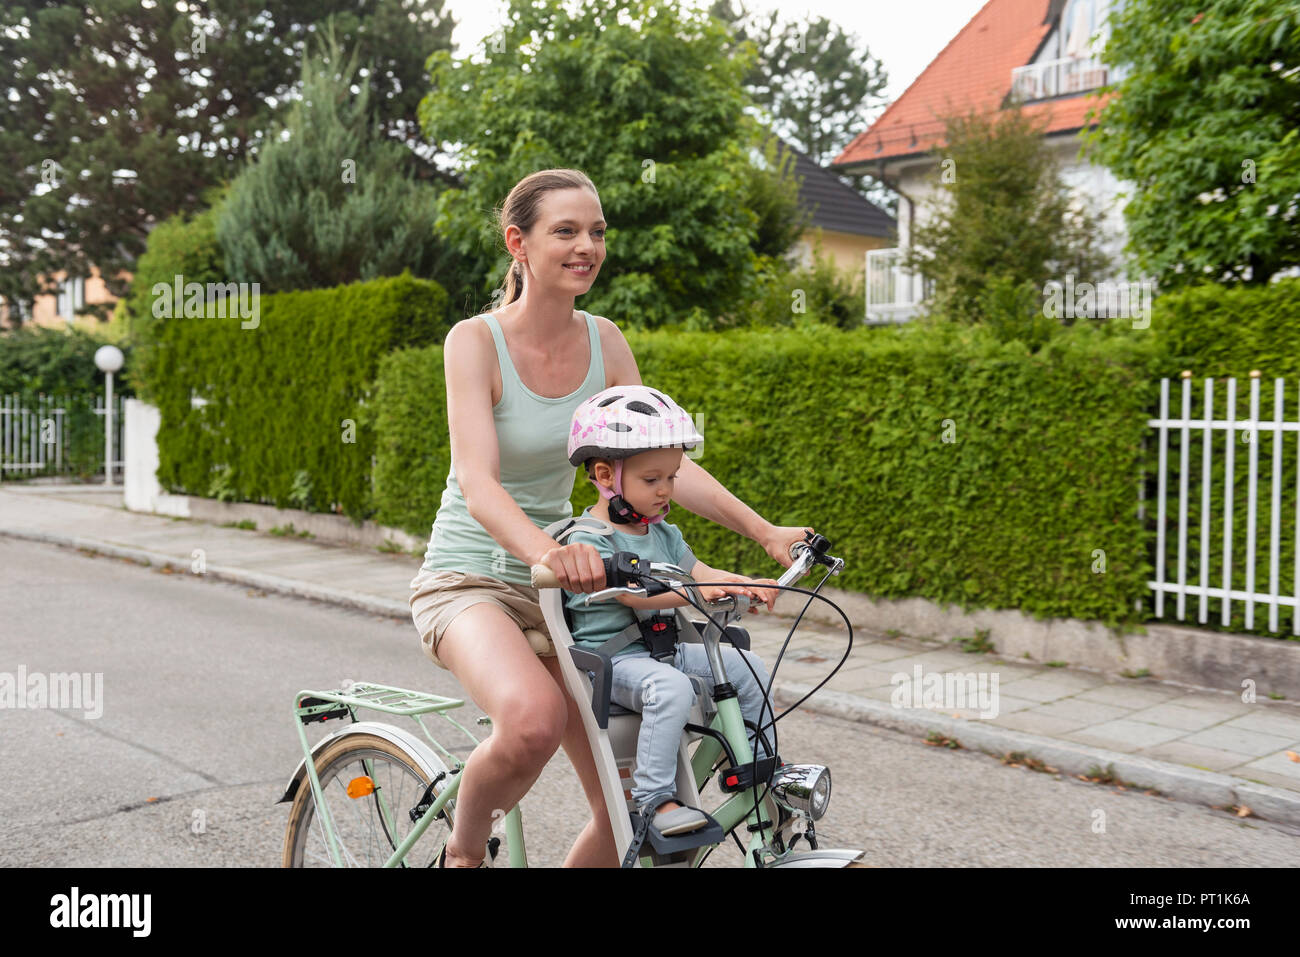 Mother and daughter riding bicycle, daughter wearing helmet sitting in children's seat Stock Photo